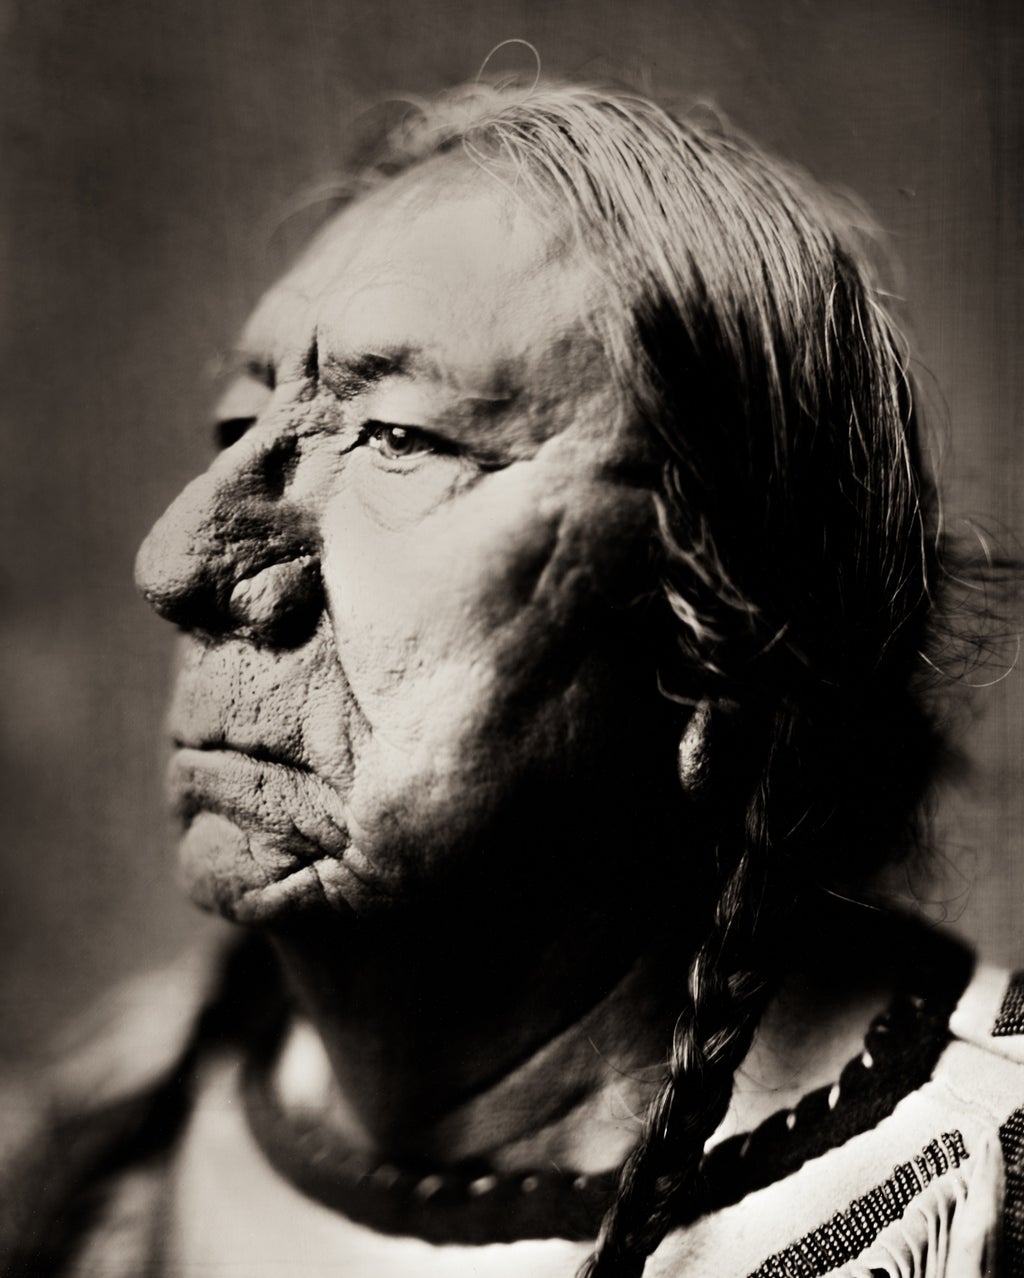 His DNA shows he’s Sitting Bull’s great-grandson. Now he’s on a mission to save his legacy